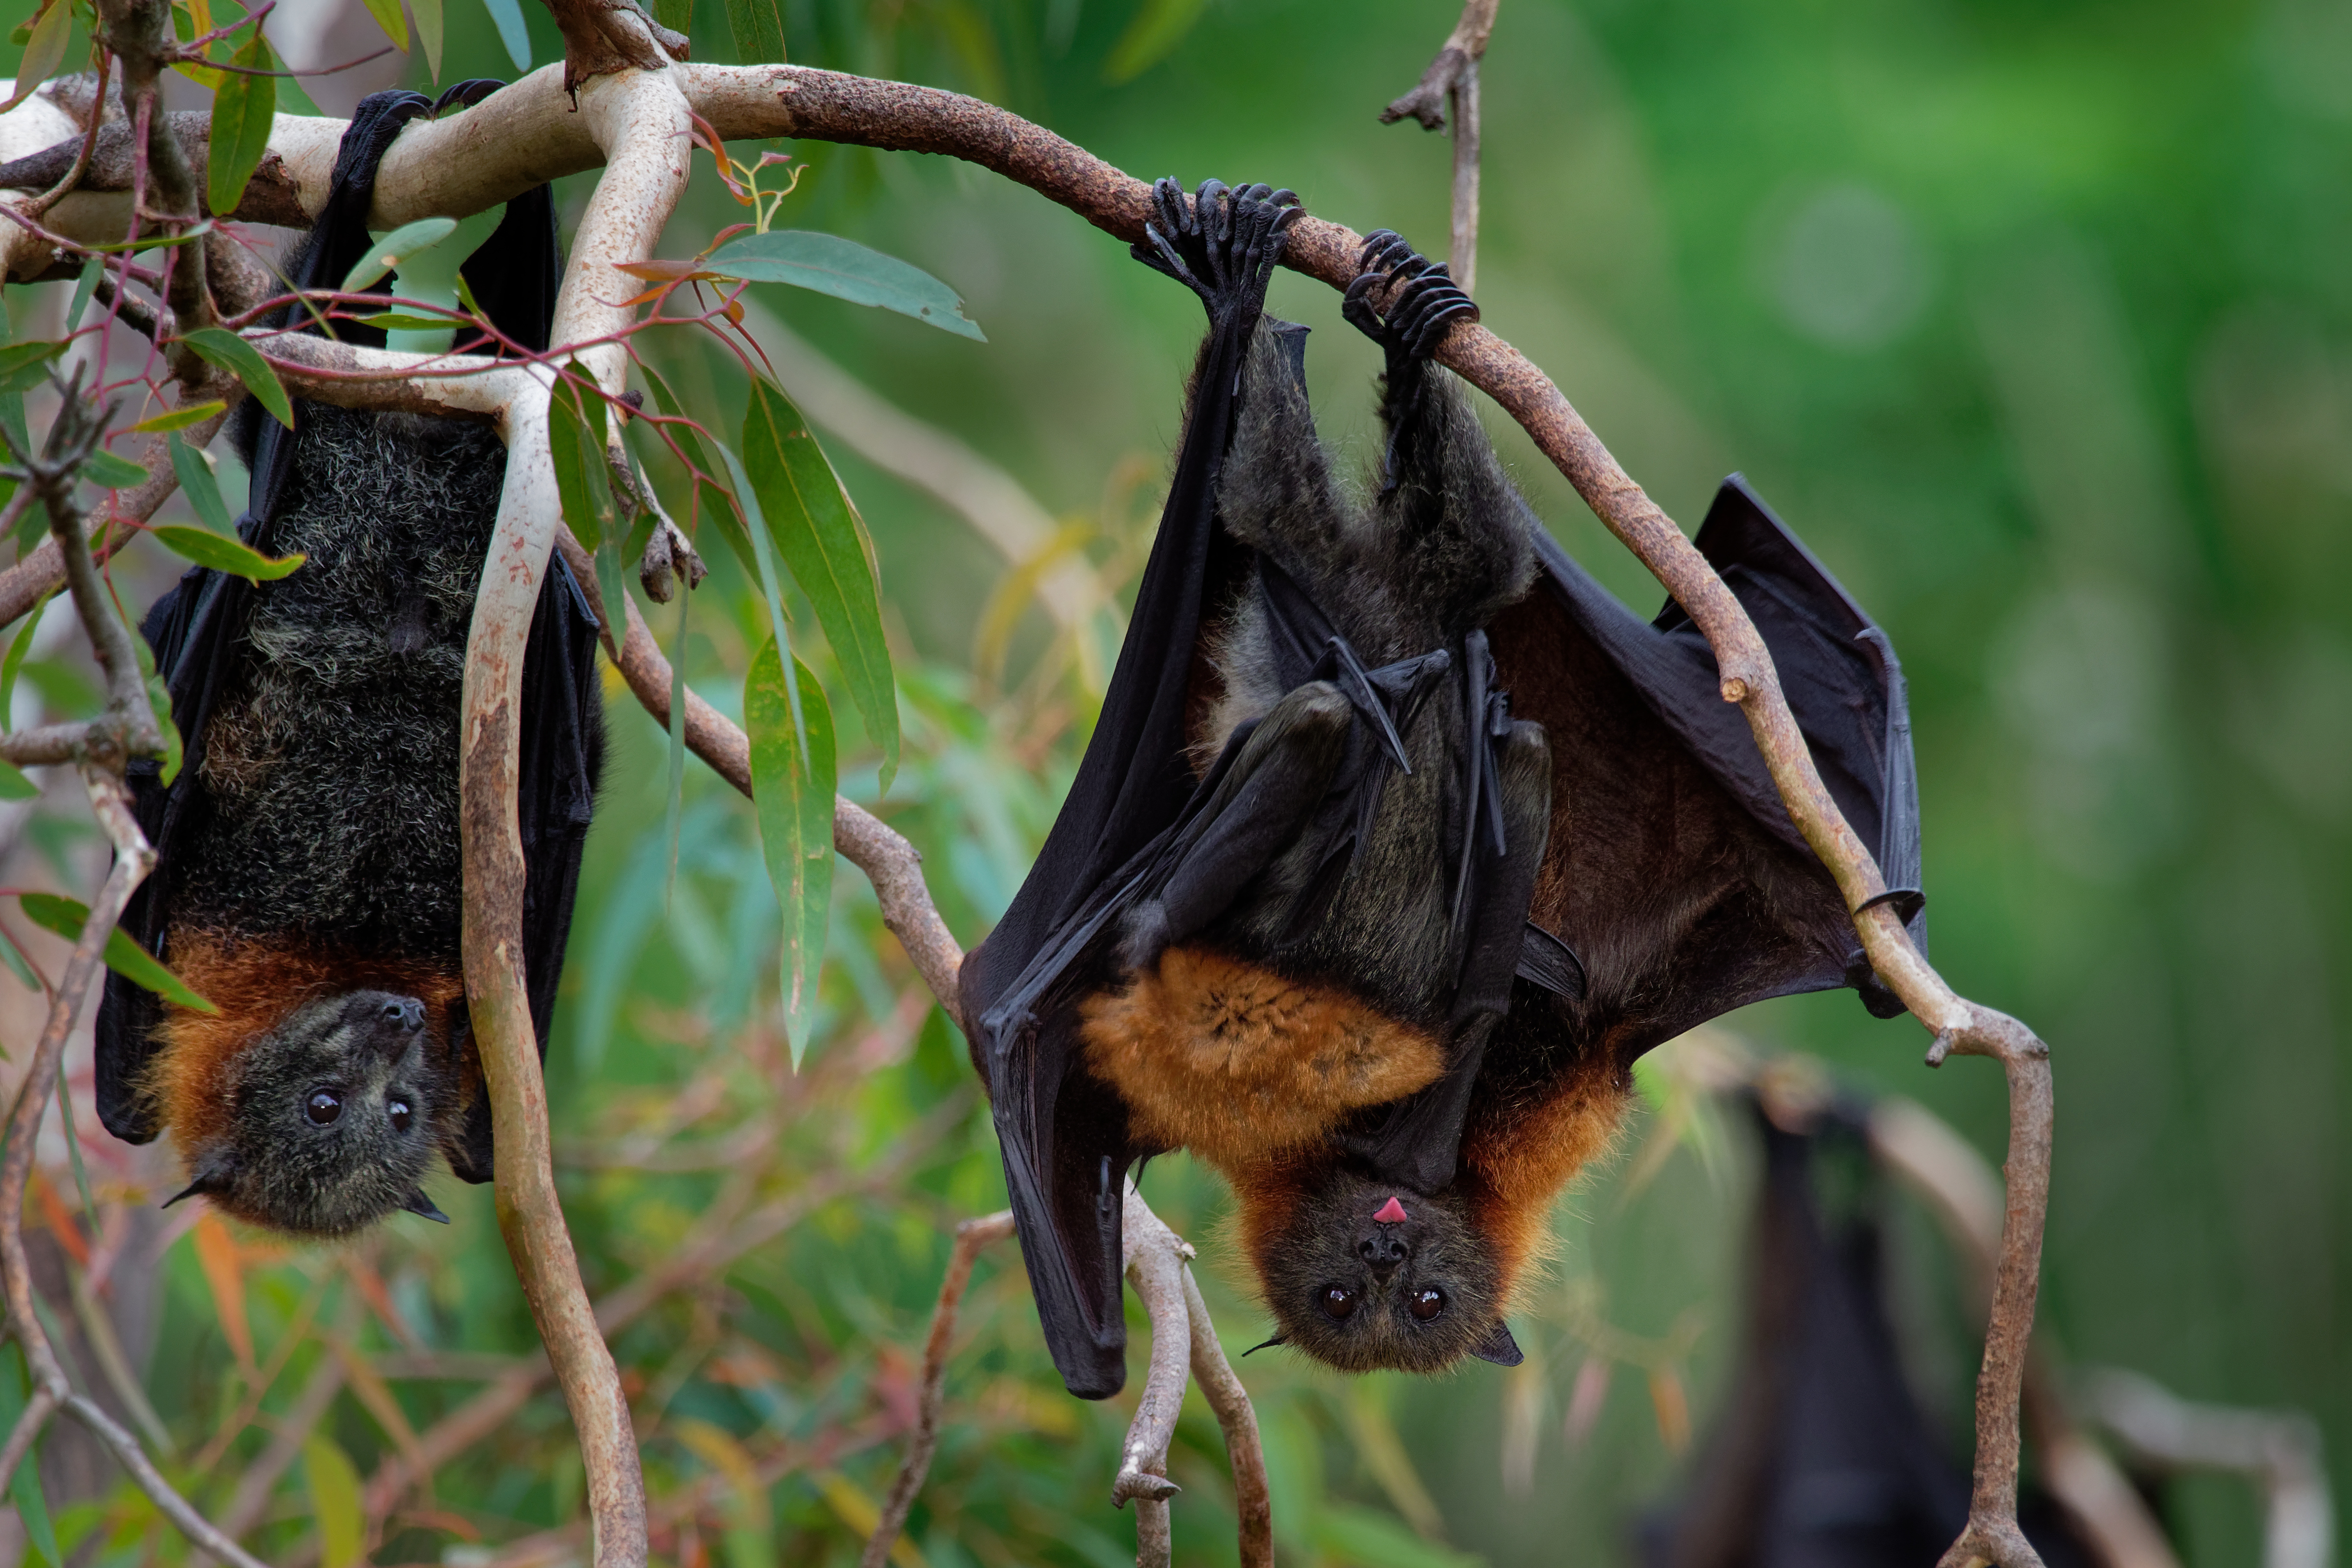 two bats hanging upside down on a branch